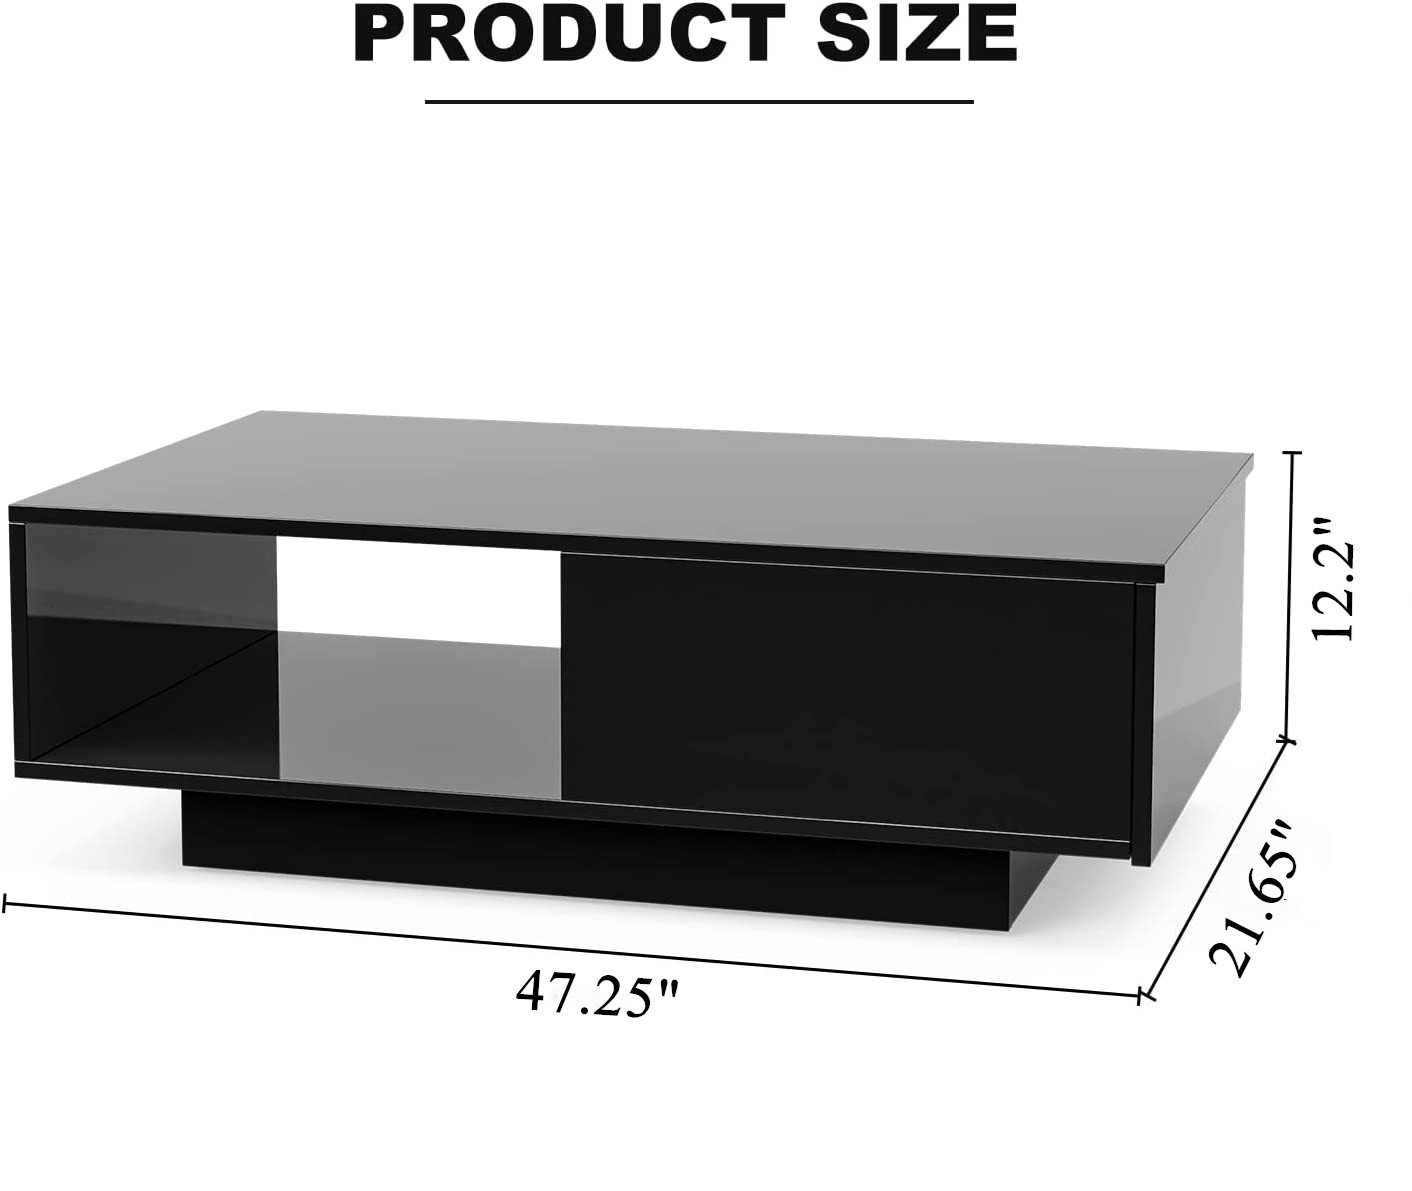 Hot Sale European Style High Glossy White Coffee Table with 1 Storage Drawers for Living Room